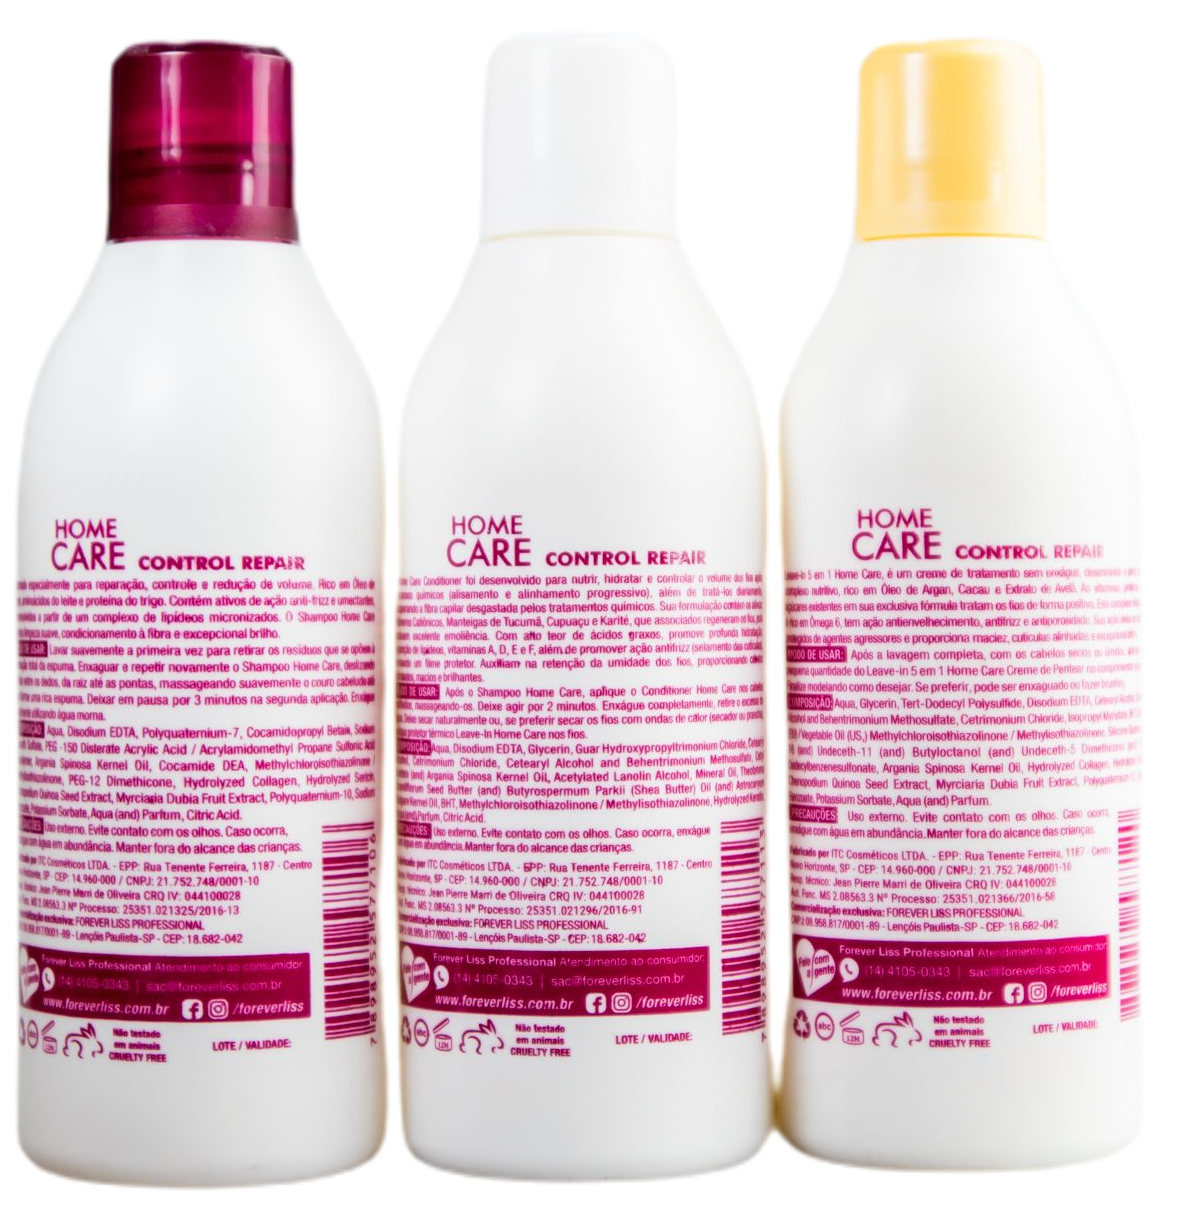 Home Care 5 em 1 - Leave-In 300ml Forever Liss